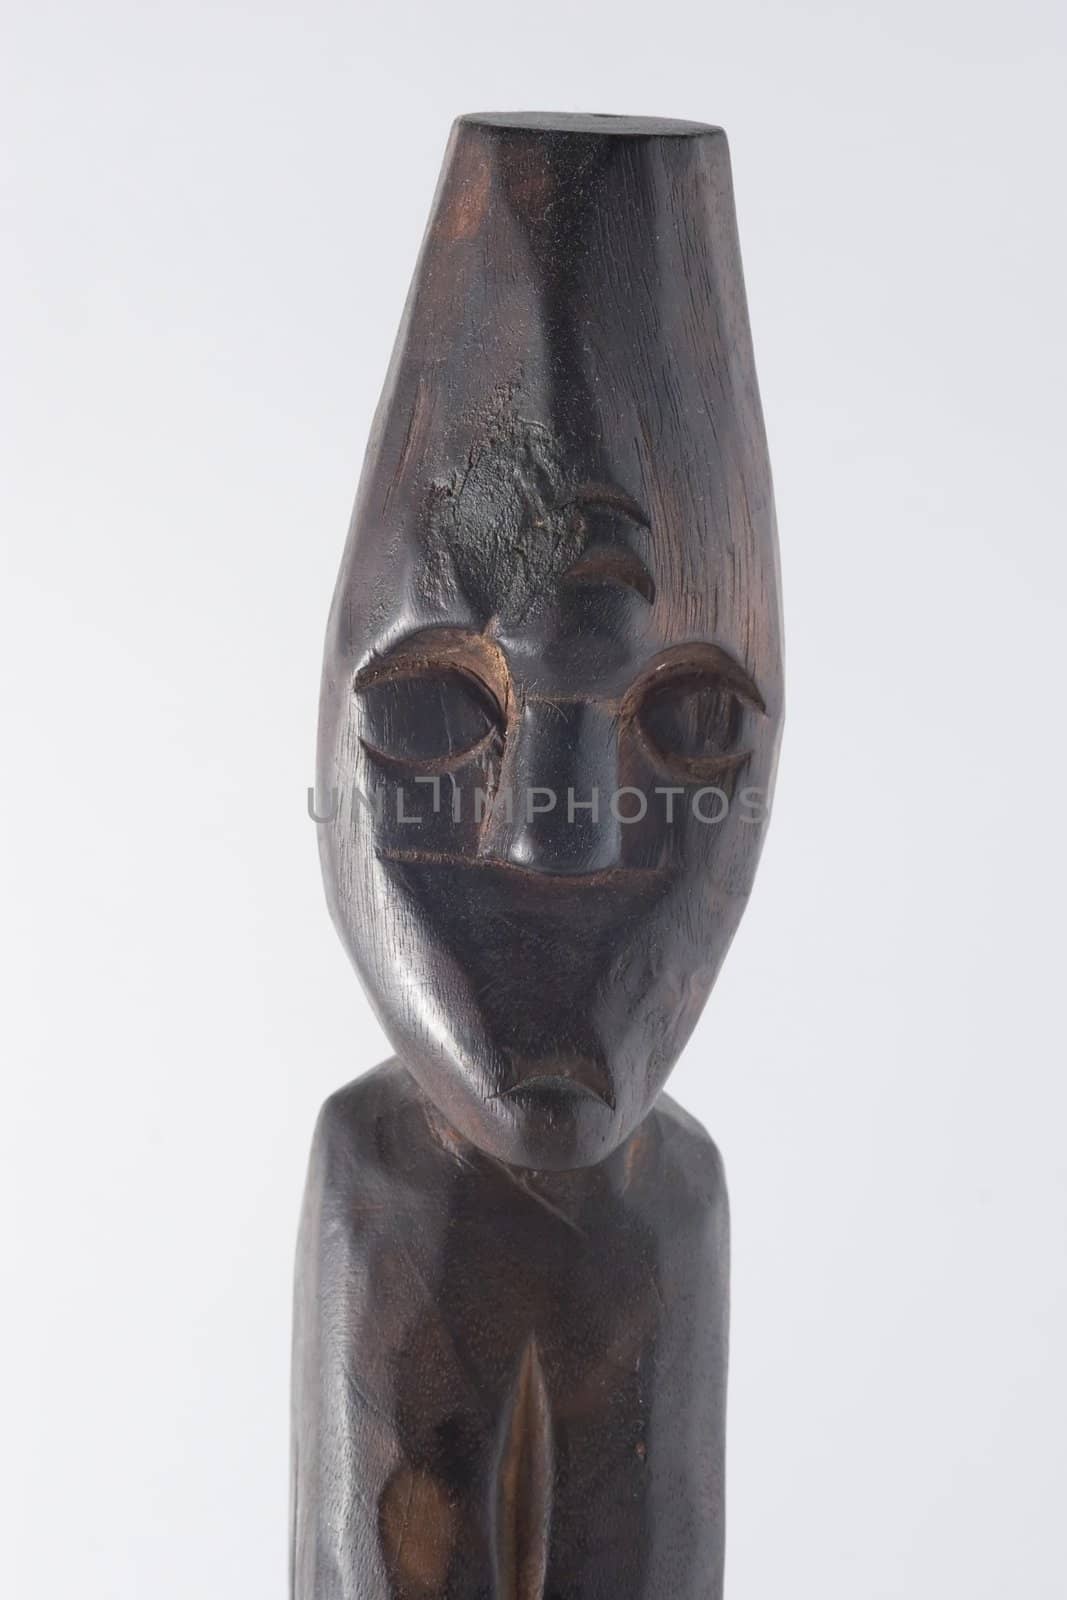 In West Africa the figures have elongated bodies, angular shapes, and facial features that represent an ideal rather than an individual.